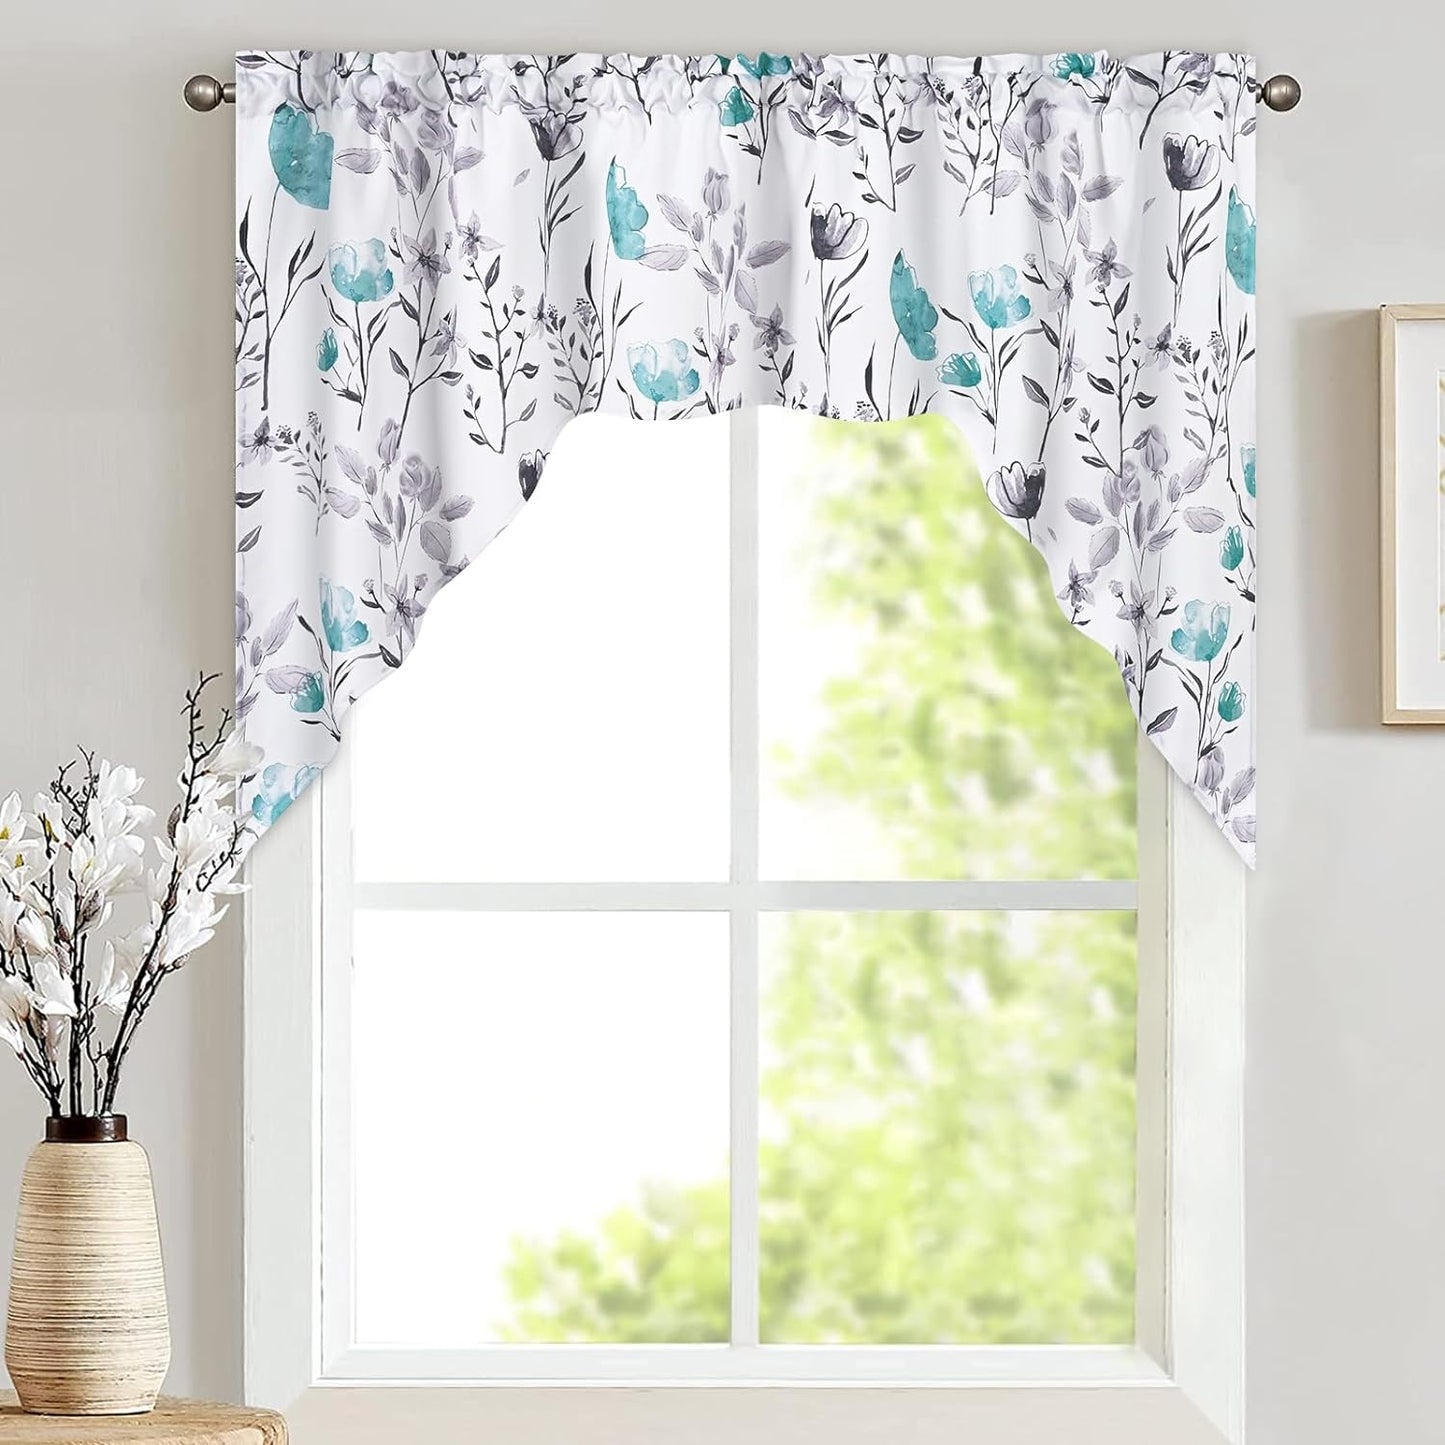 Likiyol Floral Kithchen Curtains 36 Inch Watercolor Flower Leaves Tier Curtains, Yellow and Gray Floral Cafe Curtains, Rod Pocket Small Window Curtain for Cafe Bathroom Bedroom Drapes  Likiyol Teal 36"L X 60"W 